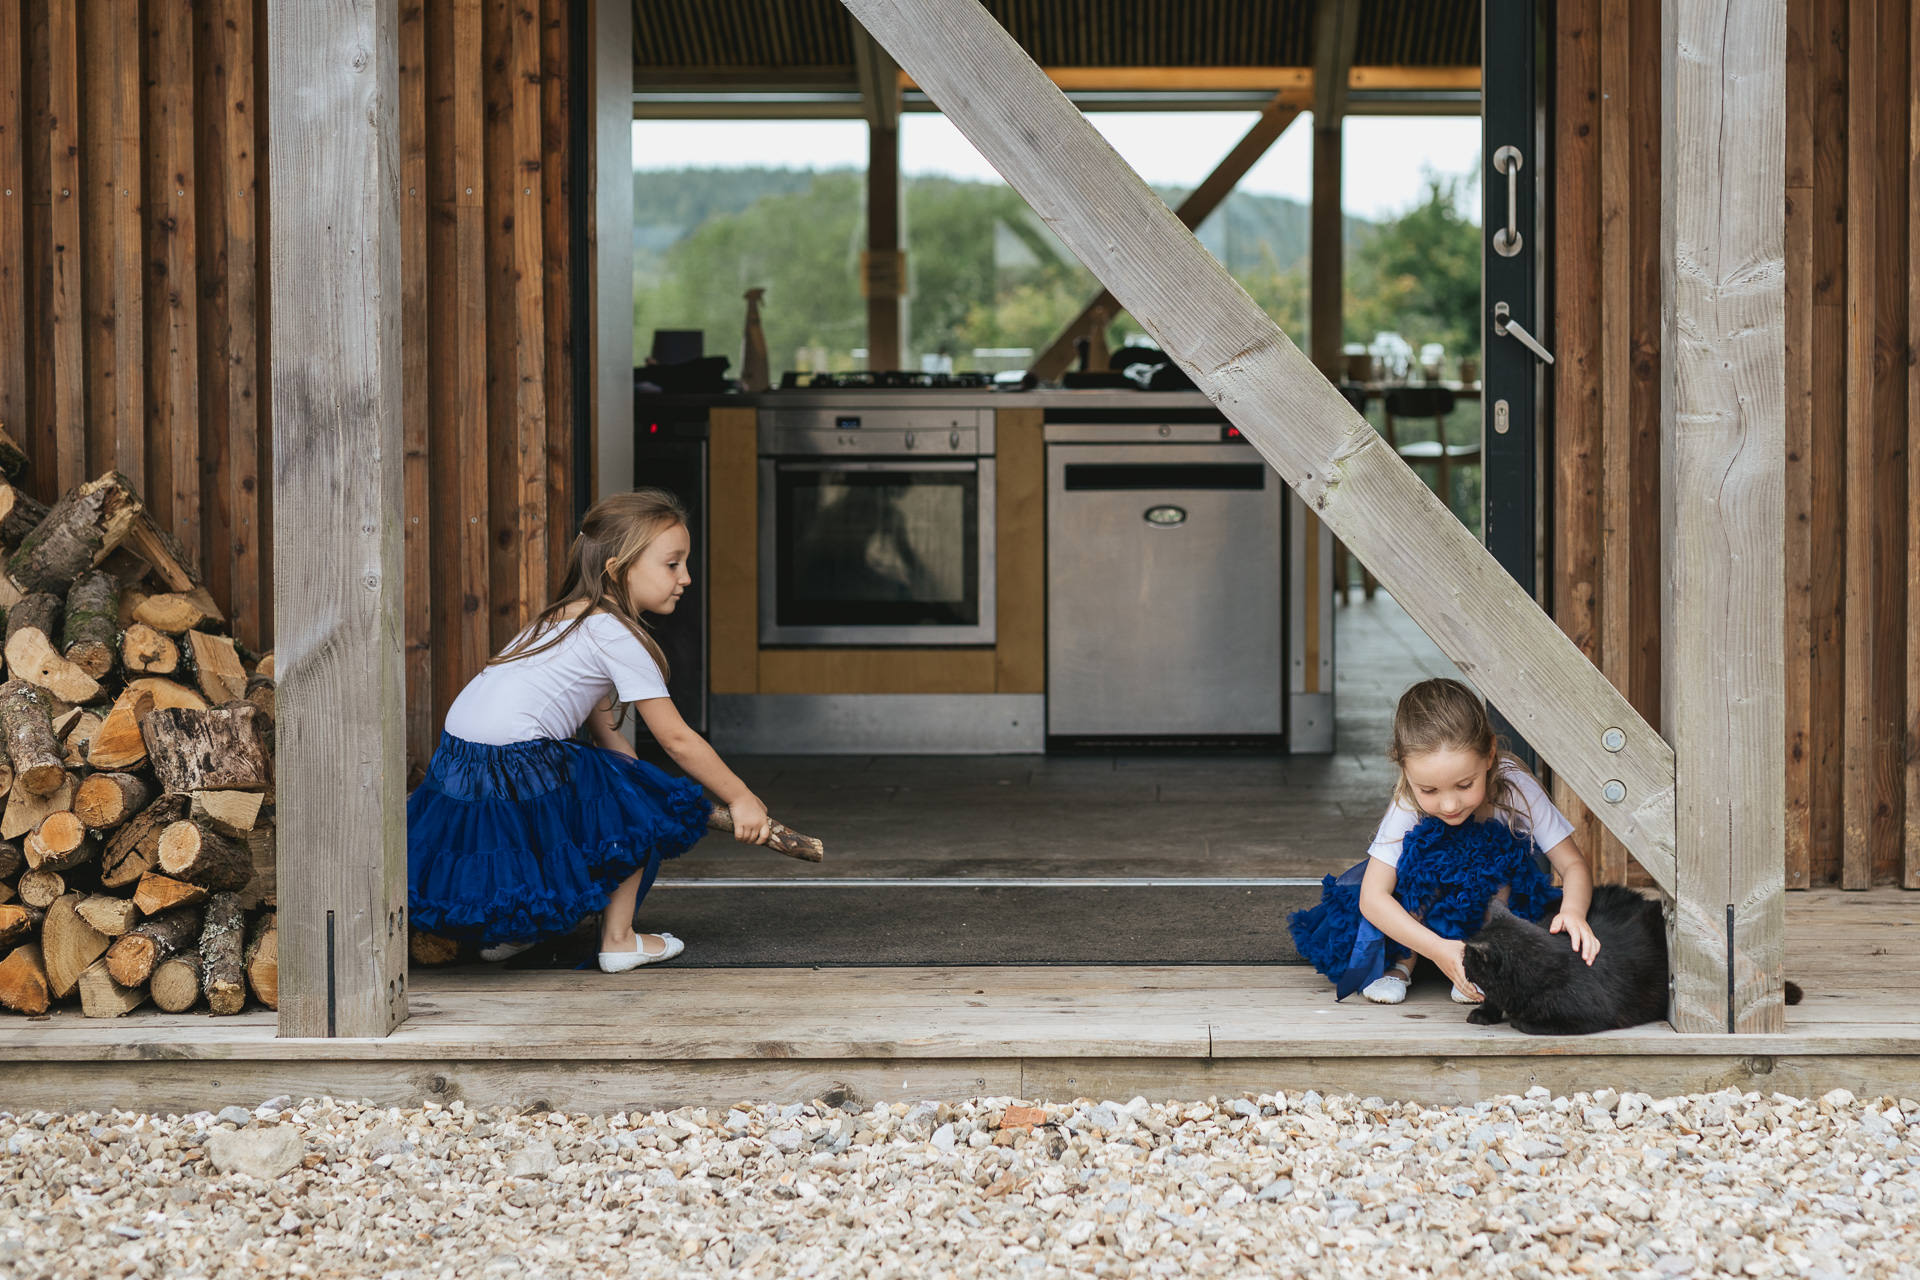 Flower girls in blue tutus playing with a black cat